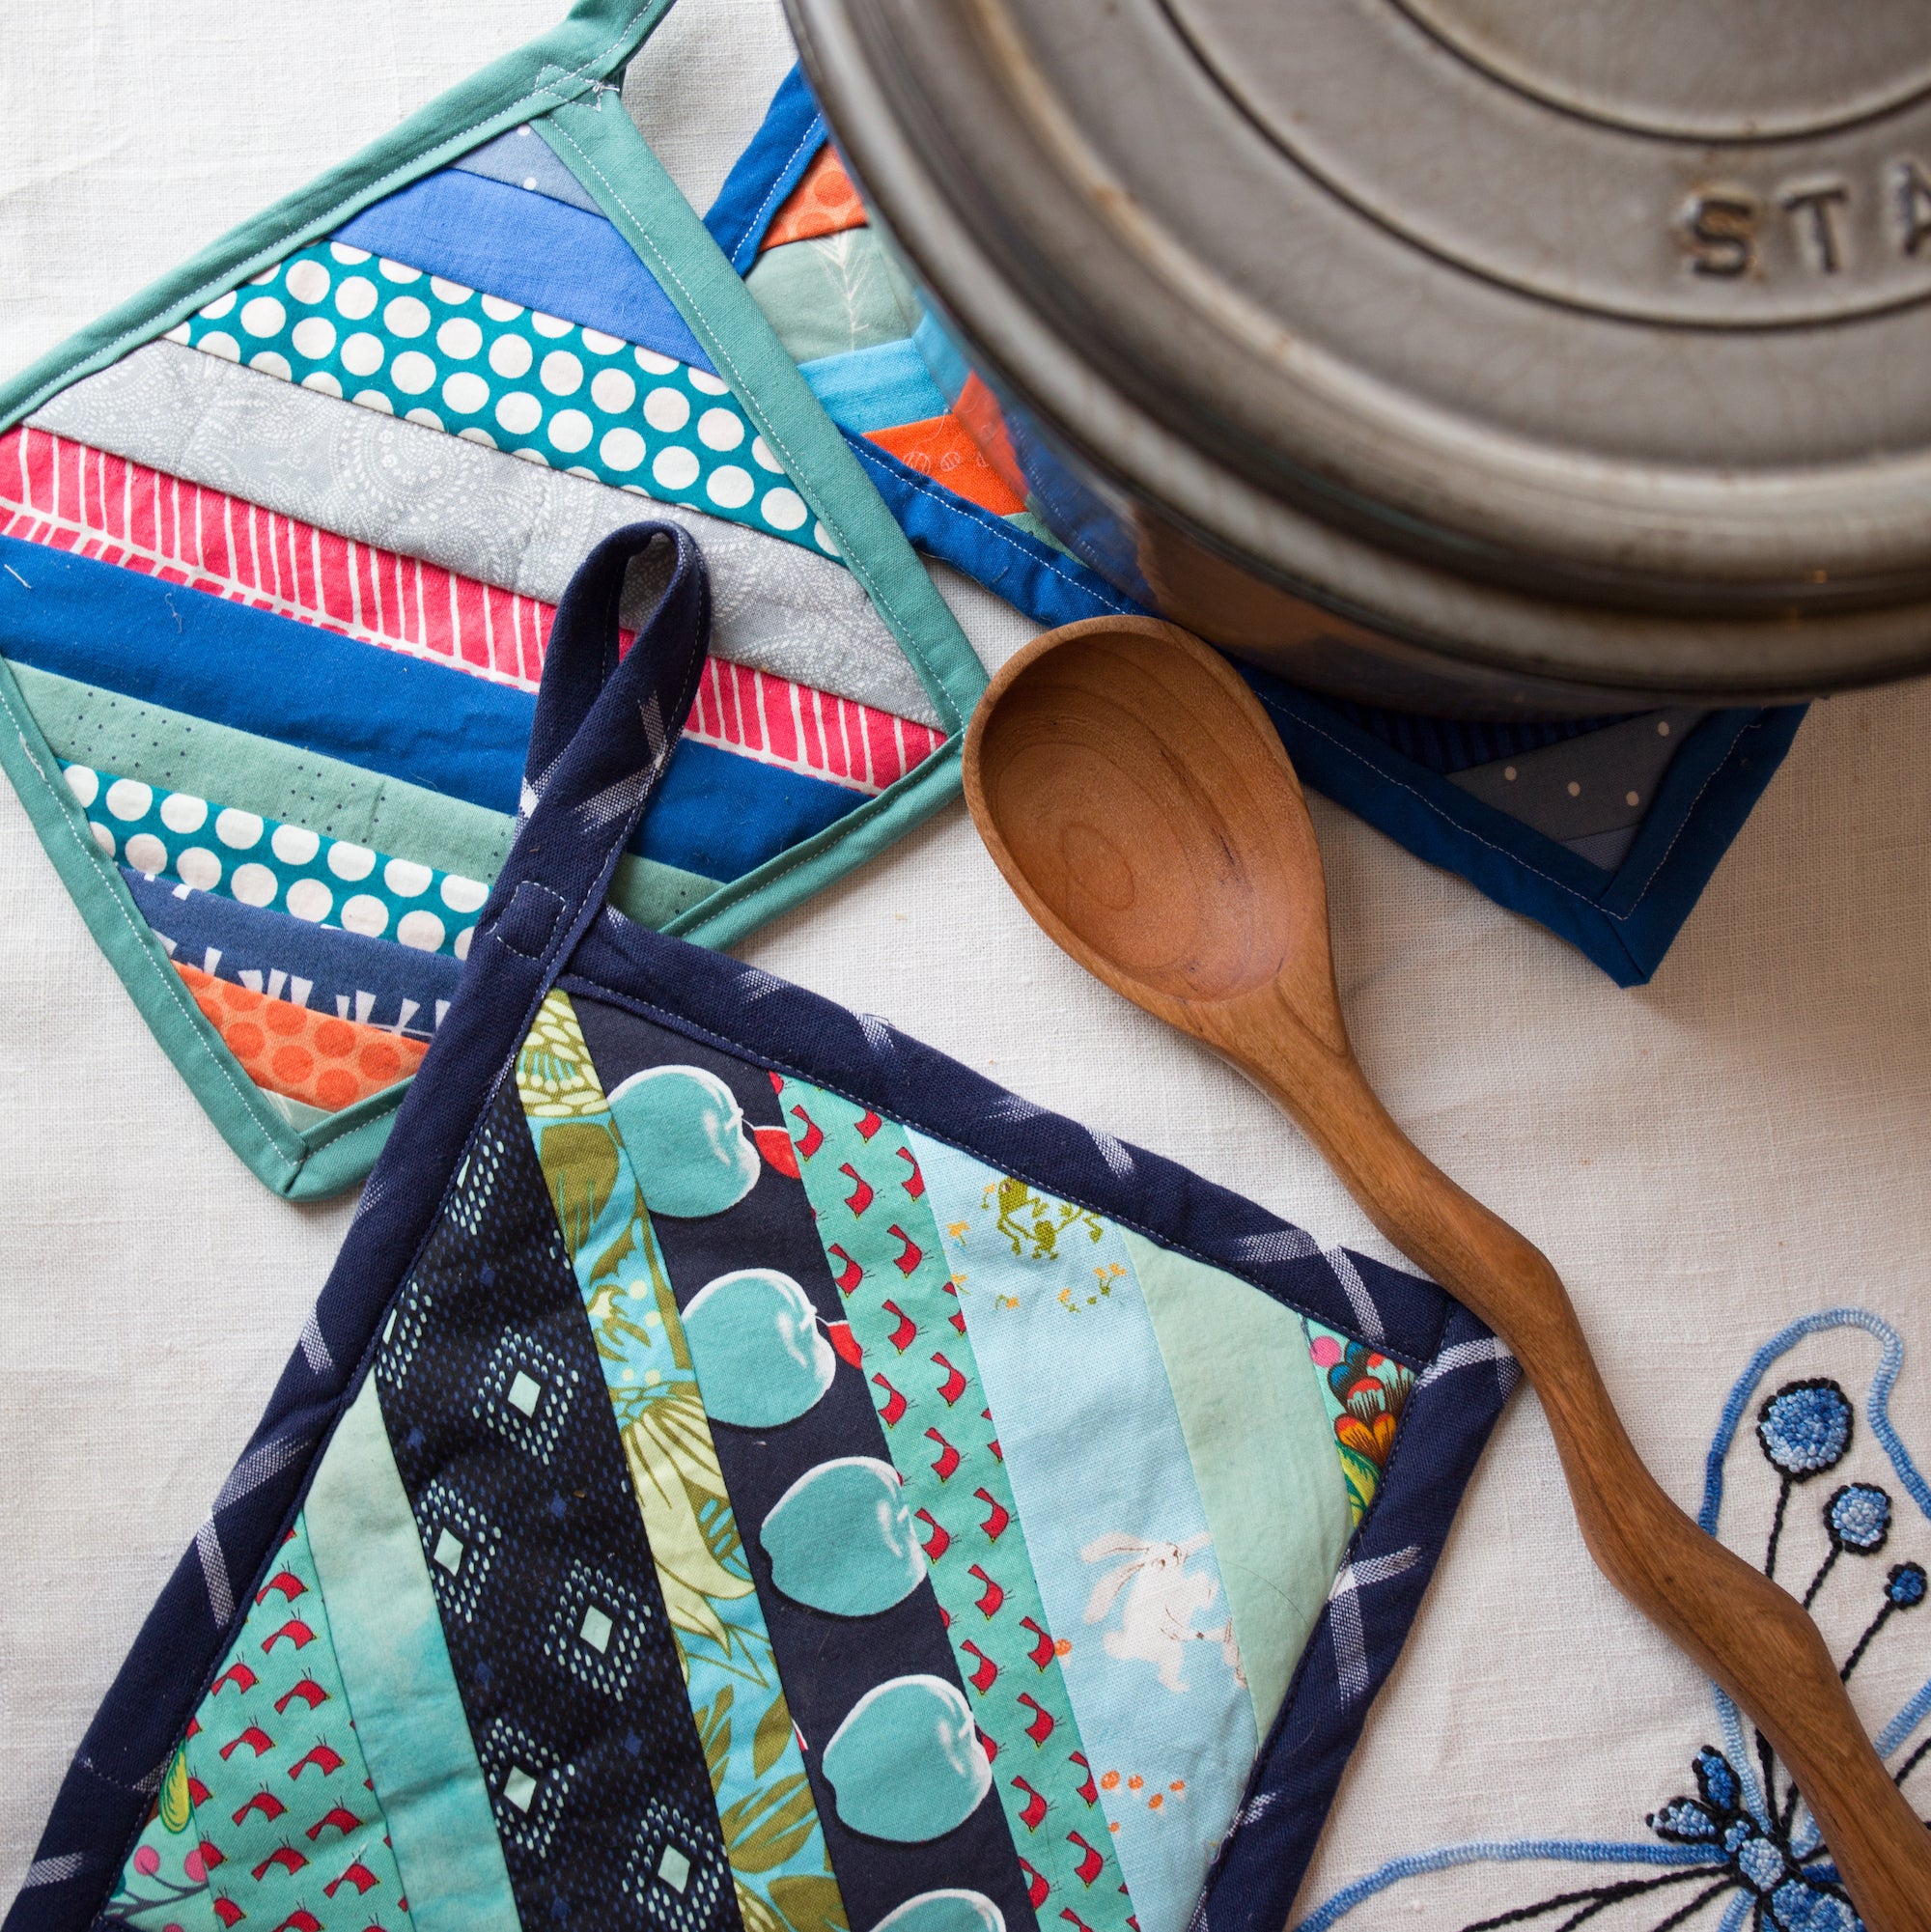 What is the best batting for a pot holder? - The Questioning Quilter